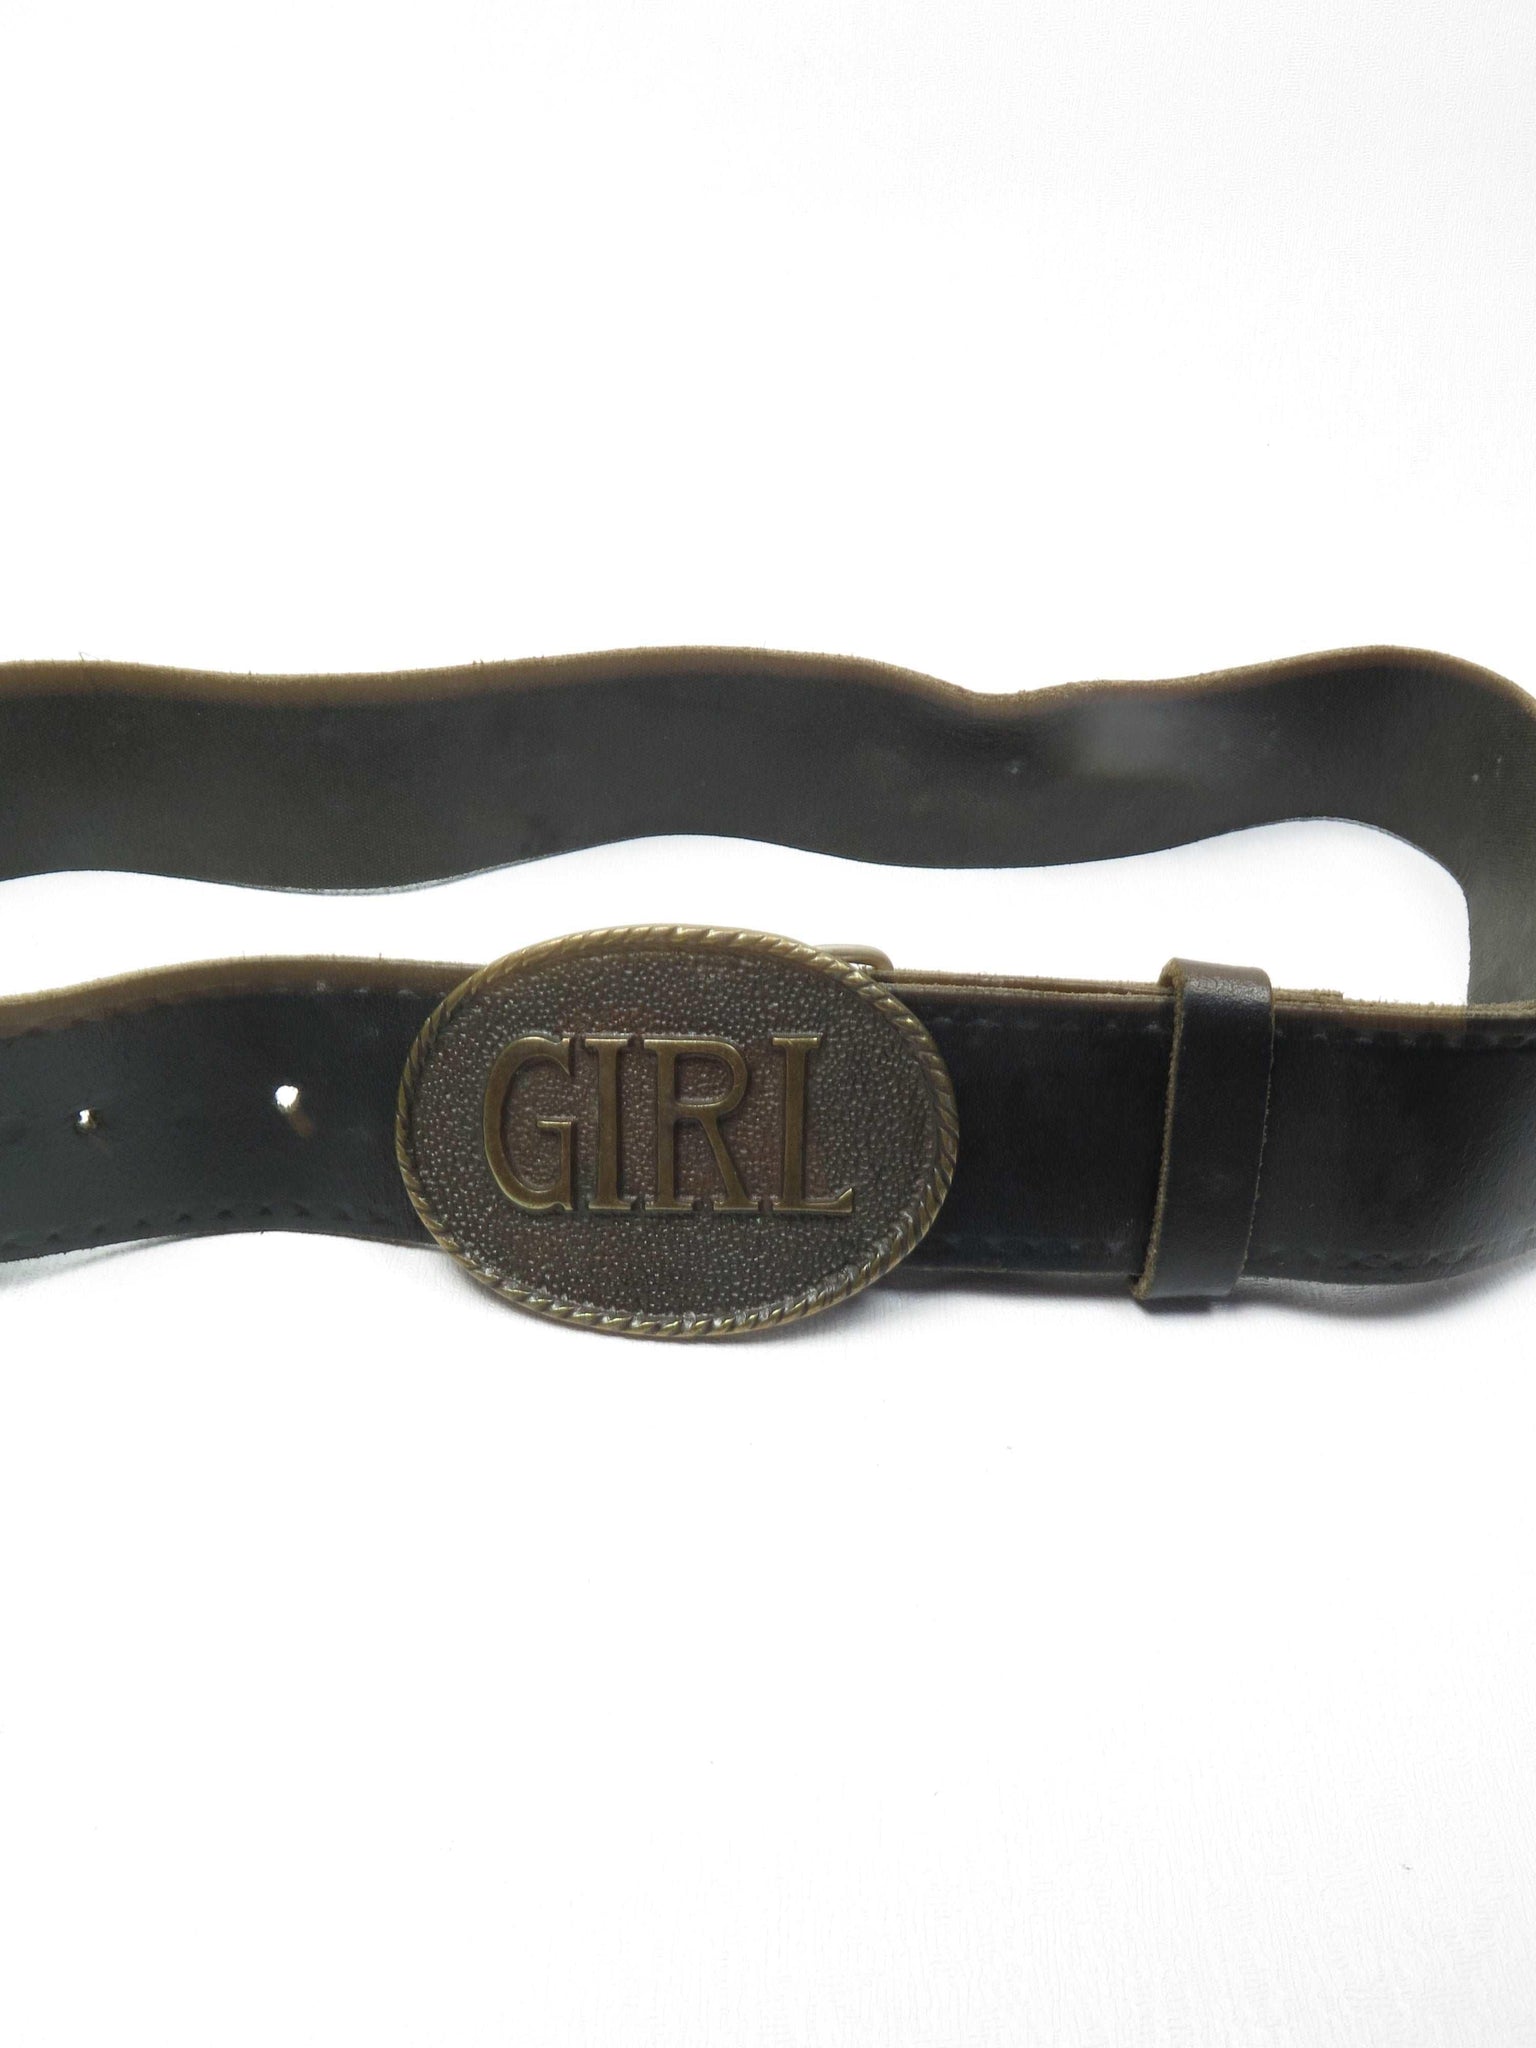 Black Leather Vintage Belt With Girl Buckle XS/S - The Harlequin